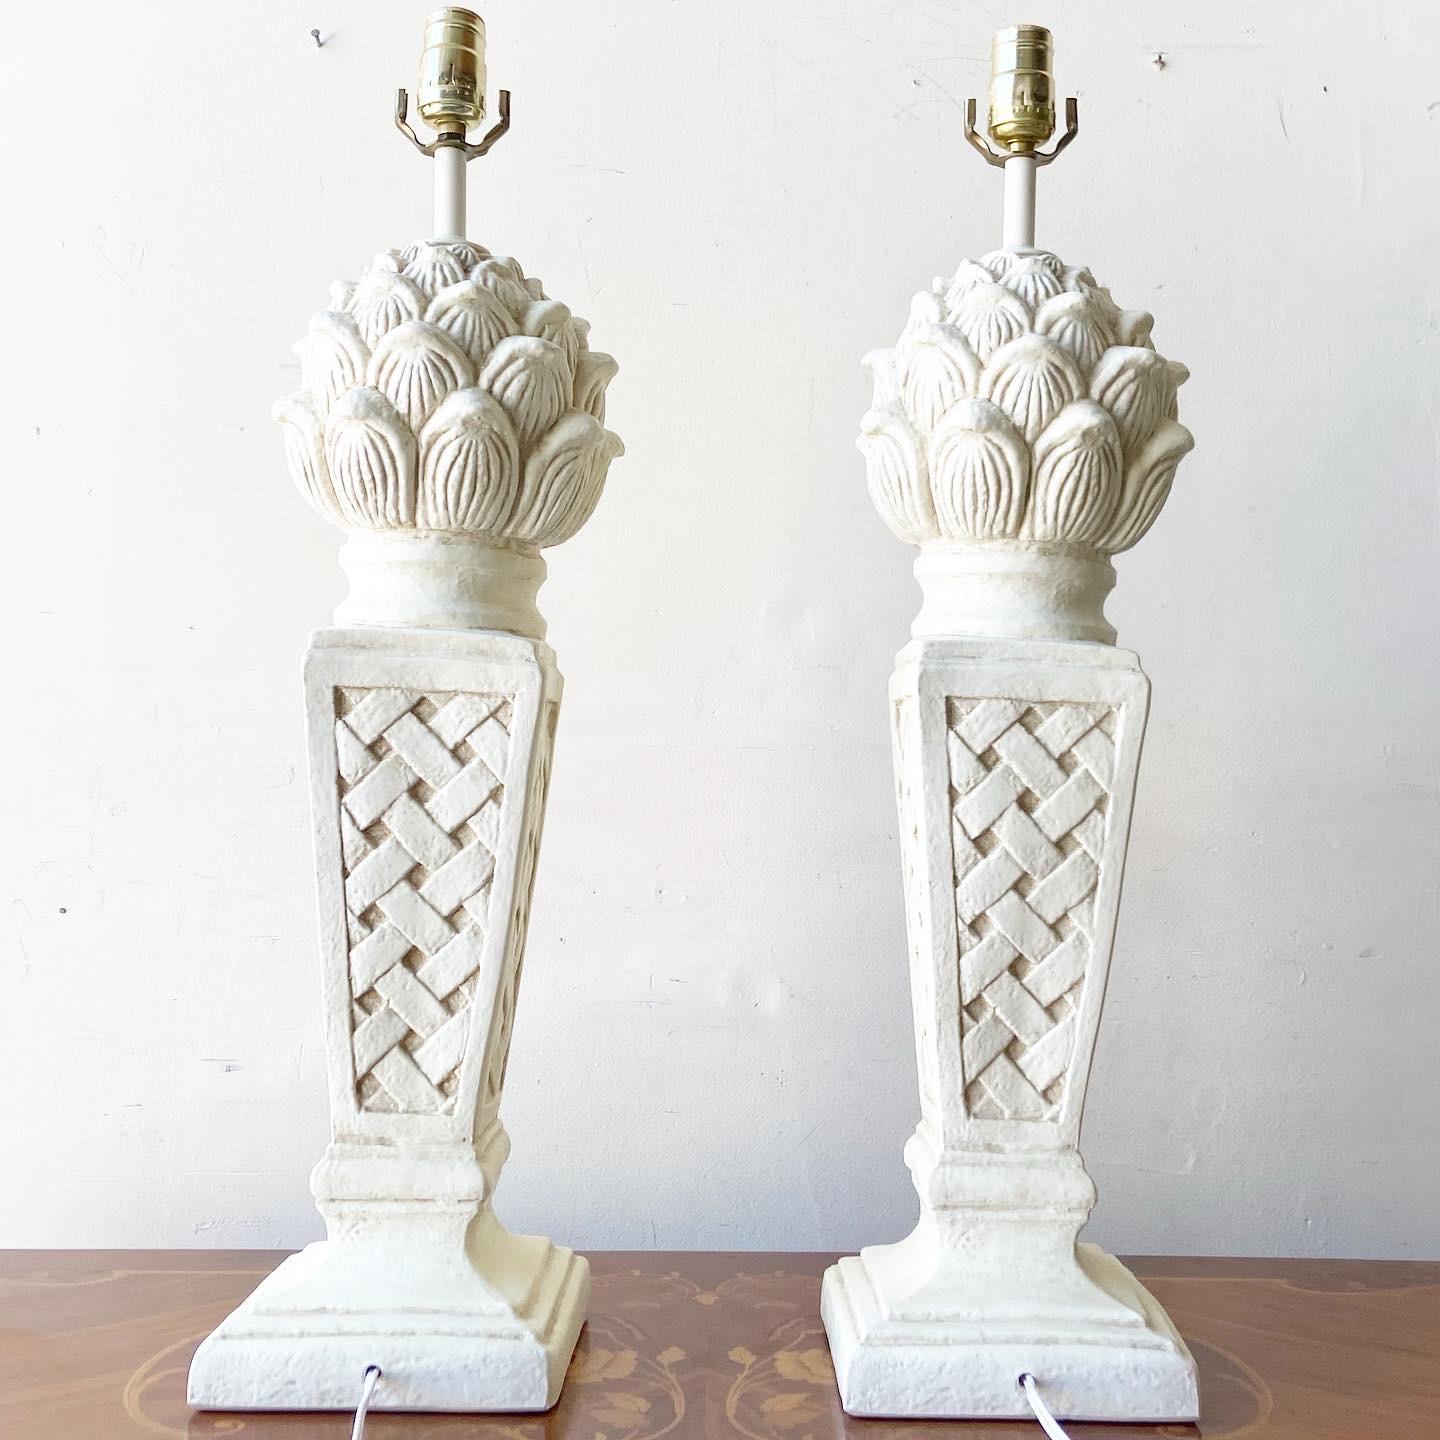 Amazing pair of cast resin sculpted table lamps. Each features a coastal theme.

3 way lighting.